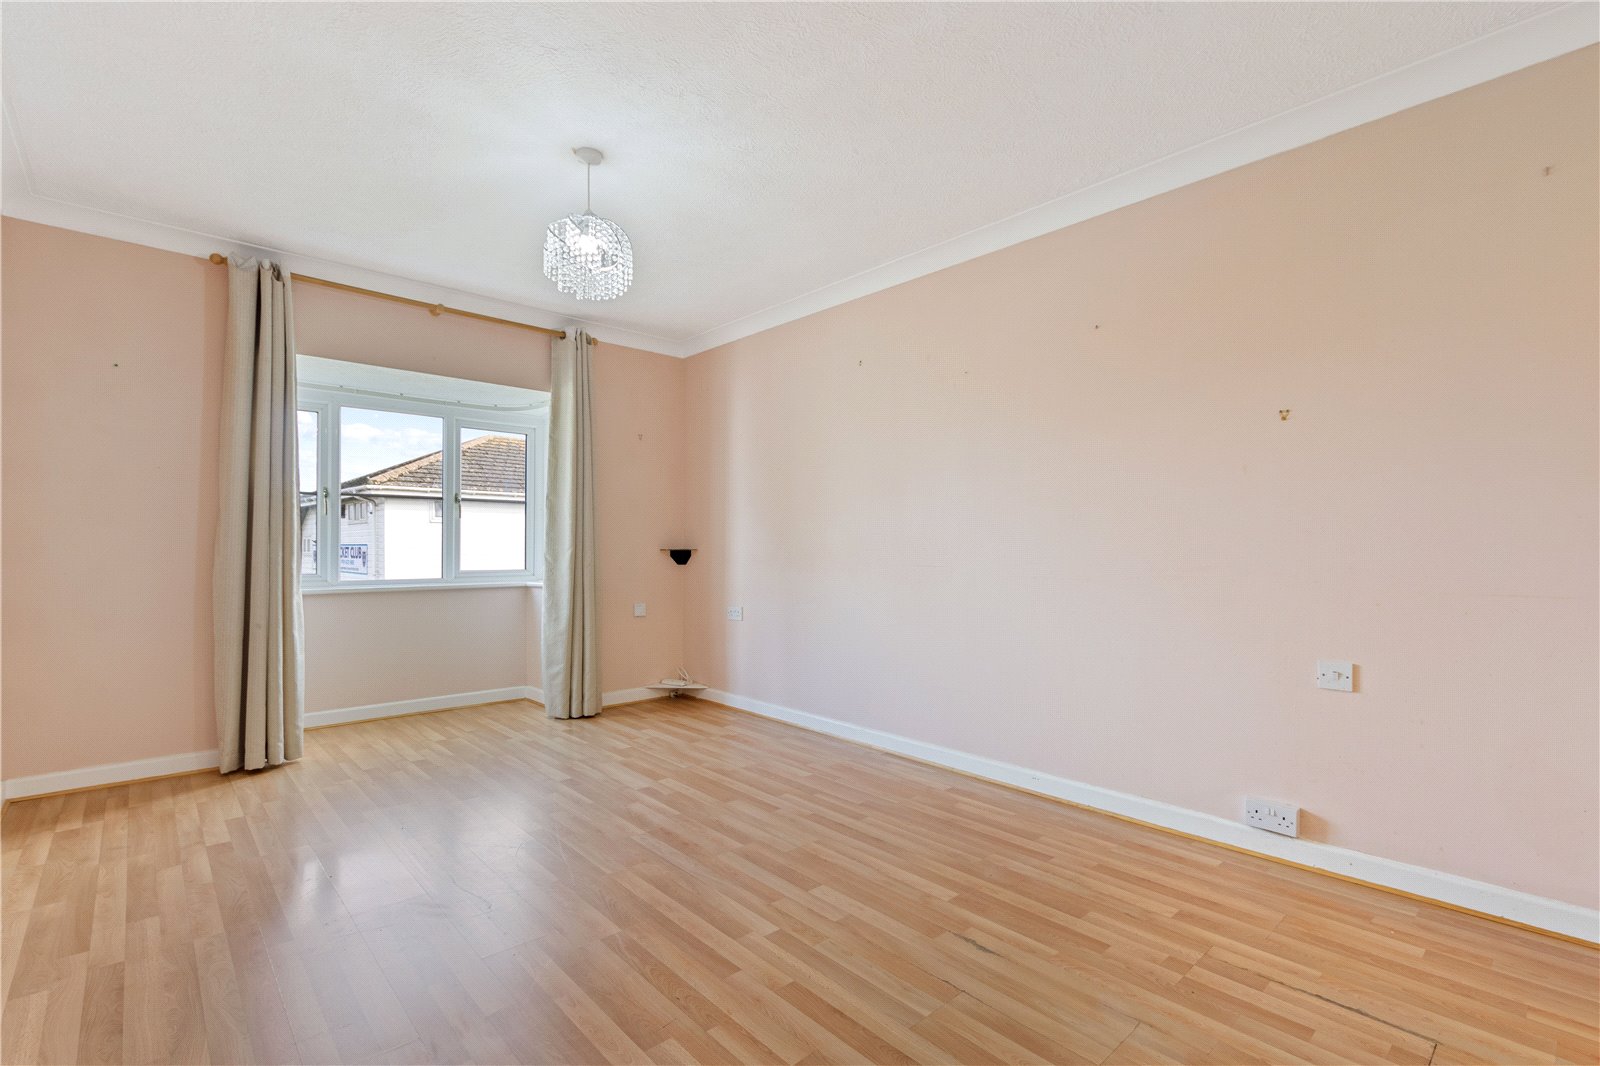 1 bed apartment for sale in Nyetimber Lane, Pagham  - Property Image 2